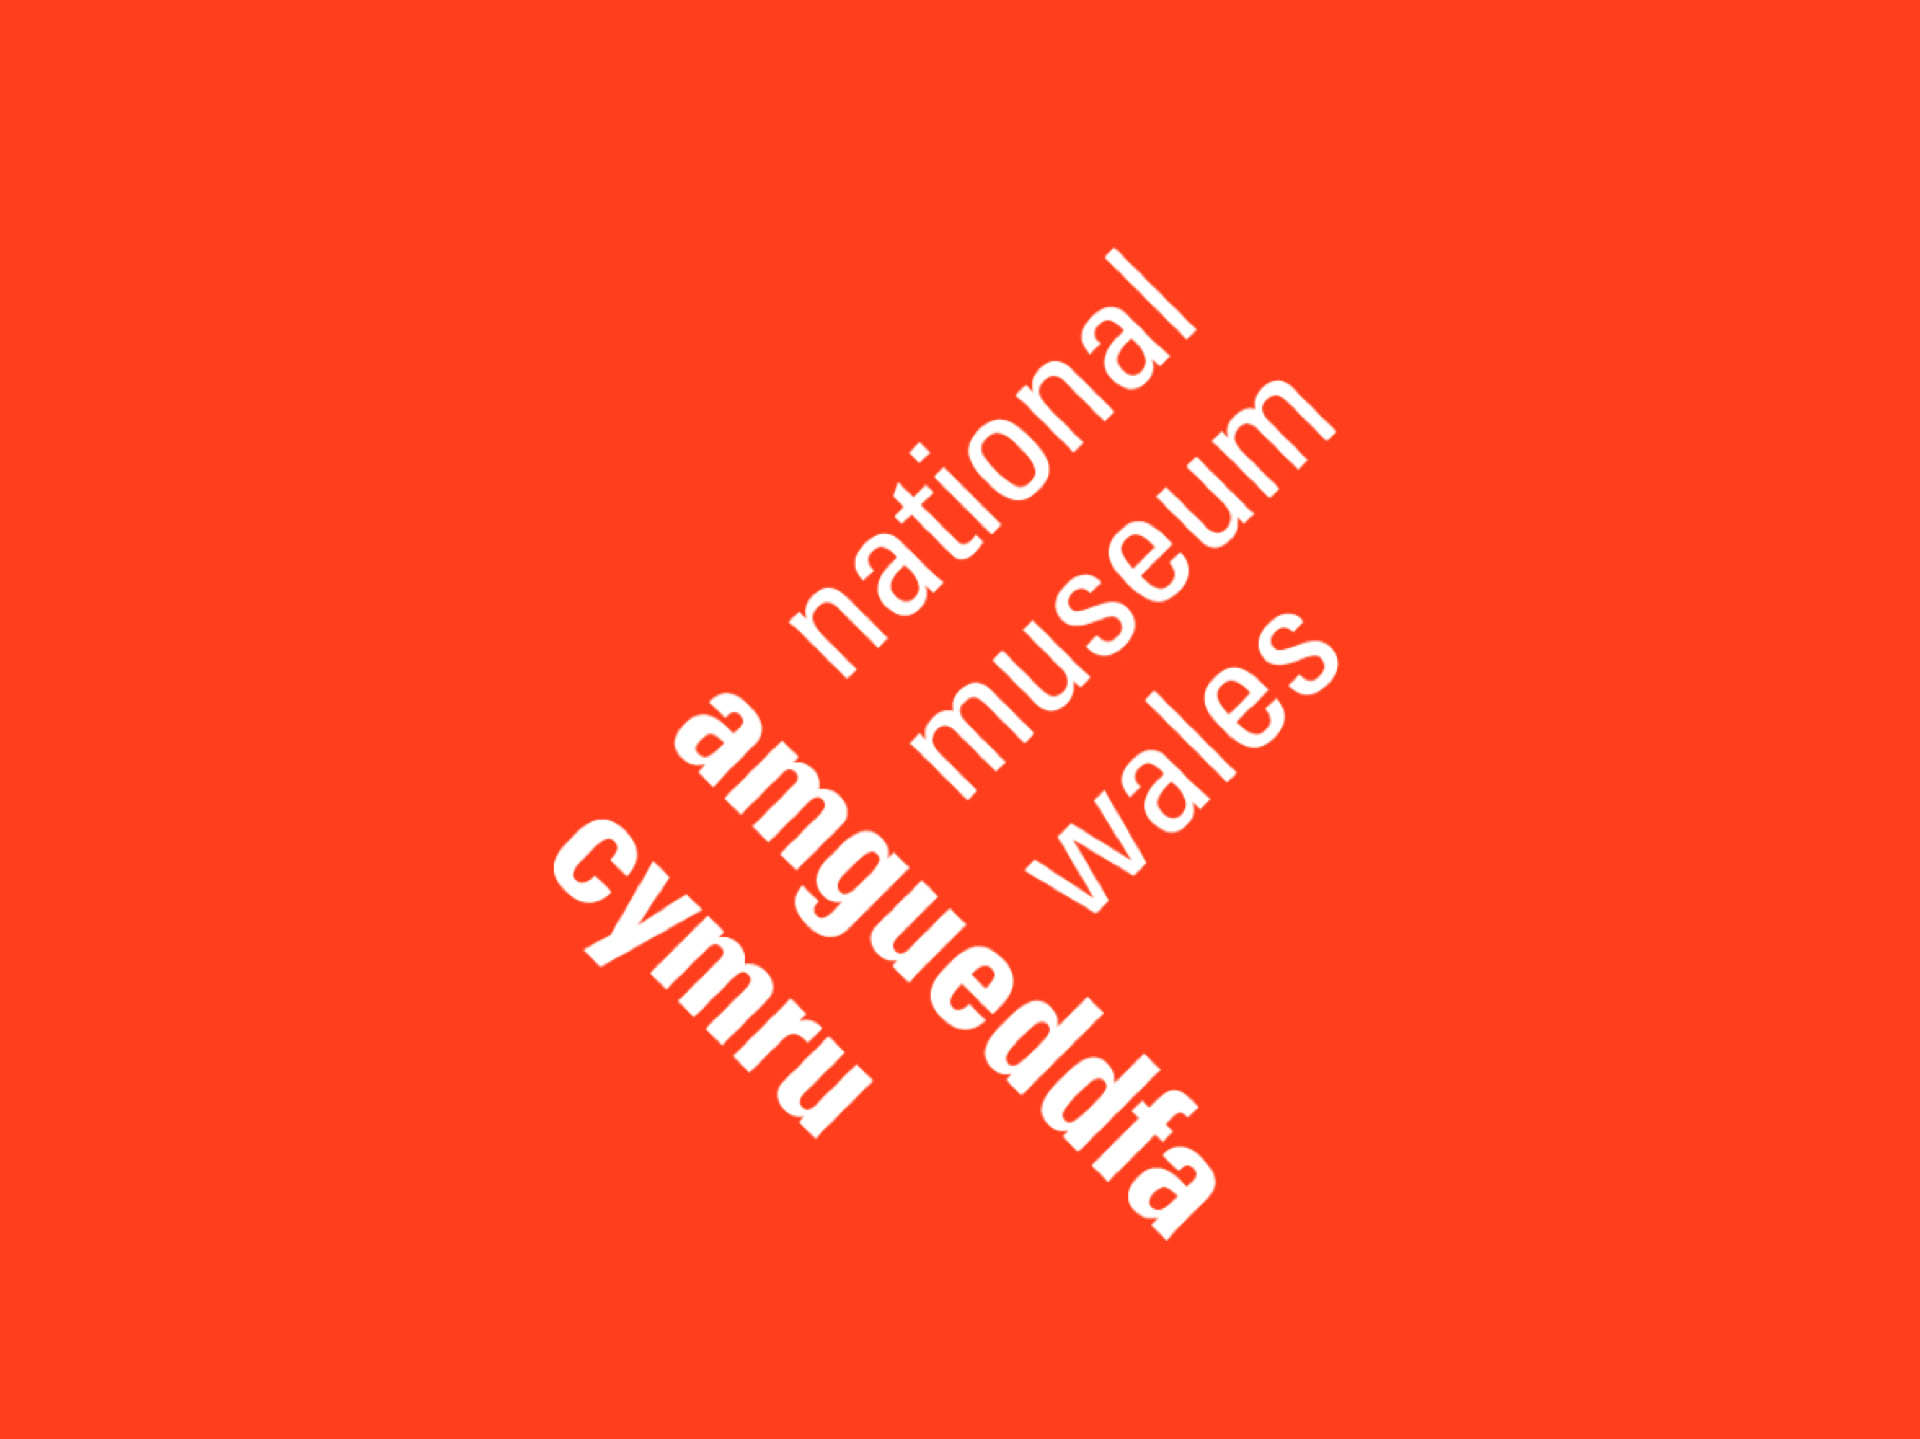 Visual identity for the National Museum Wales